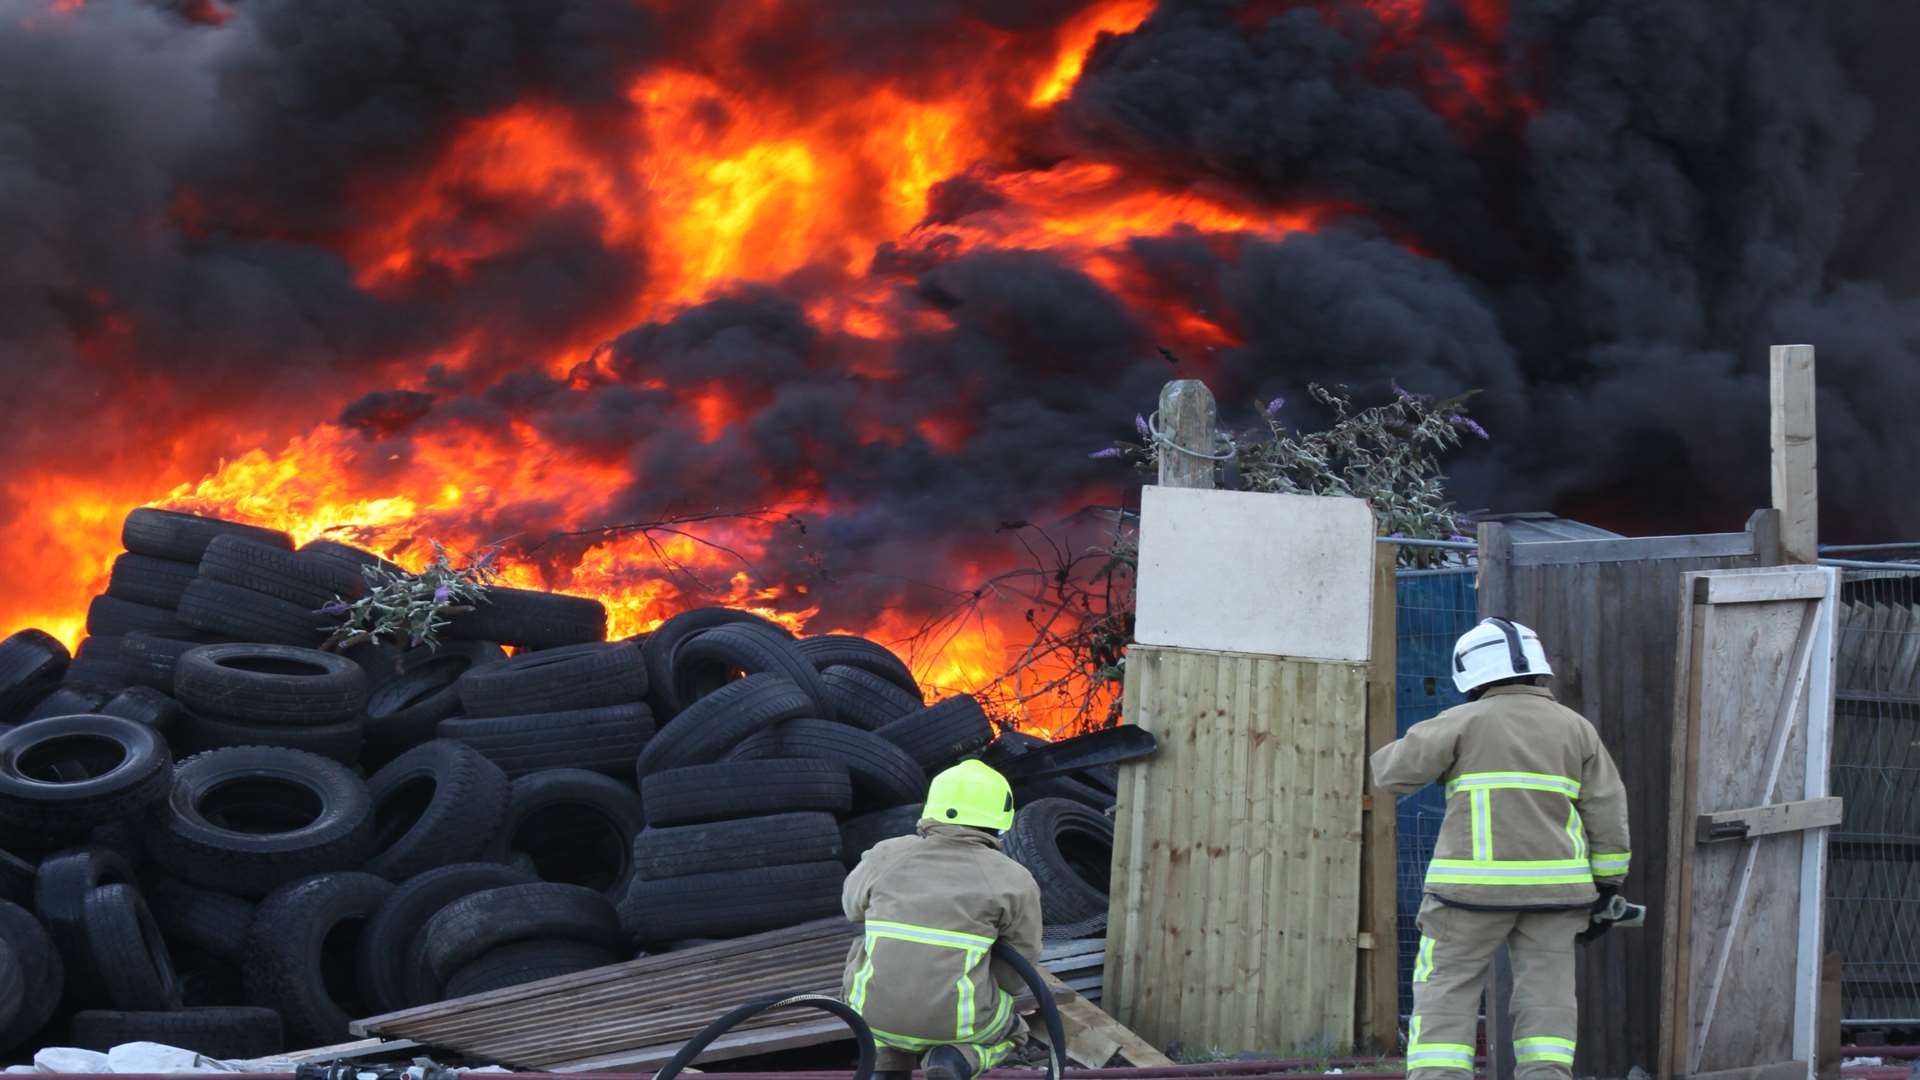 Firefighters tackling large tyre fire in Gravesend. Picture: Phil Tobin